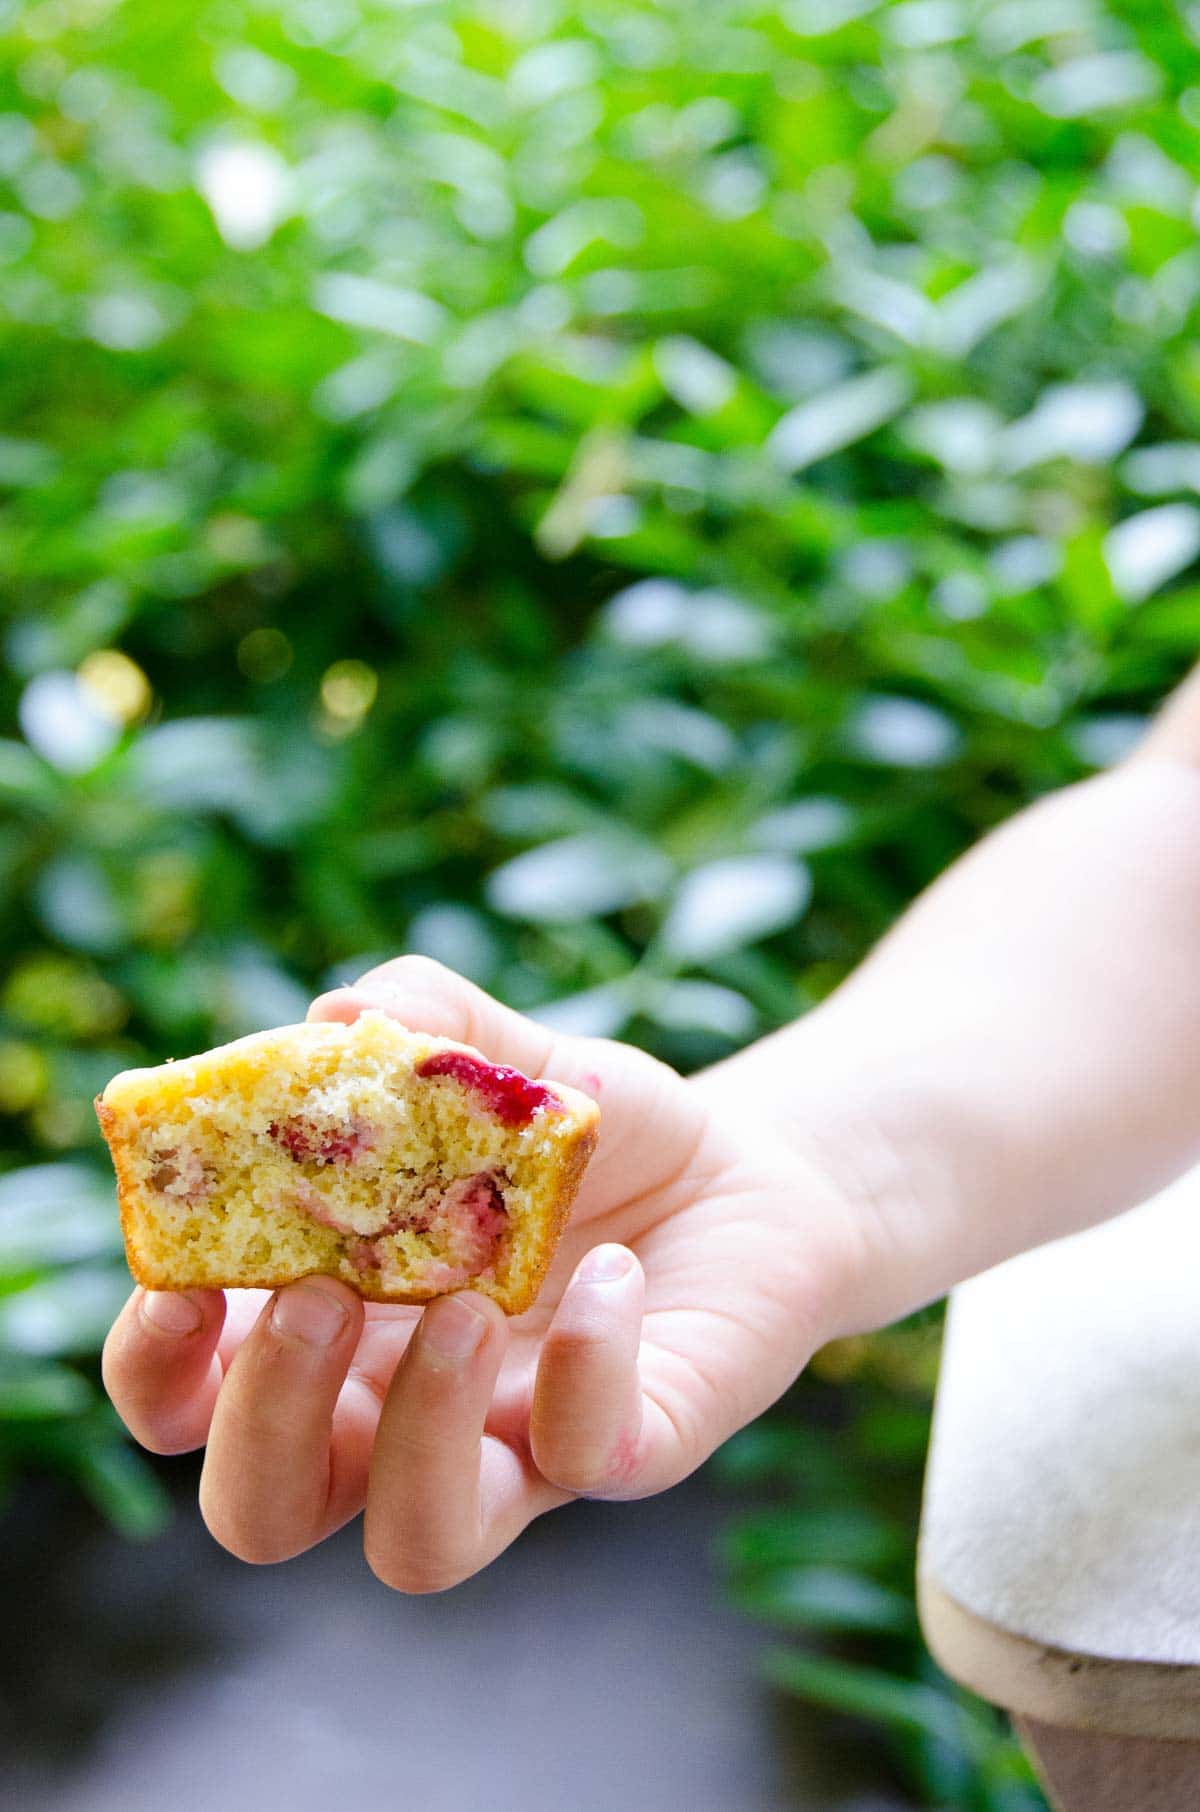 child's hand holding a sour cherry muffin outdoors